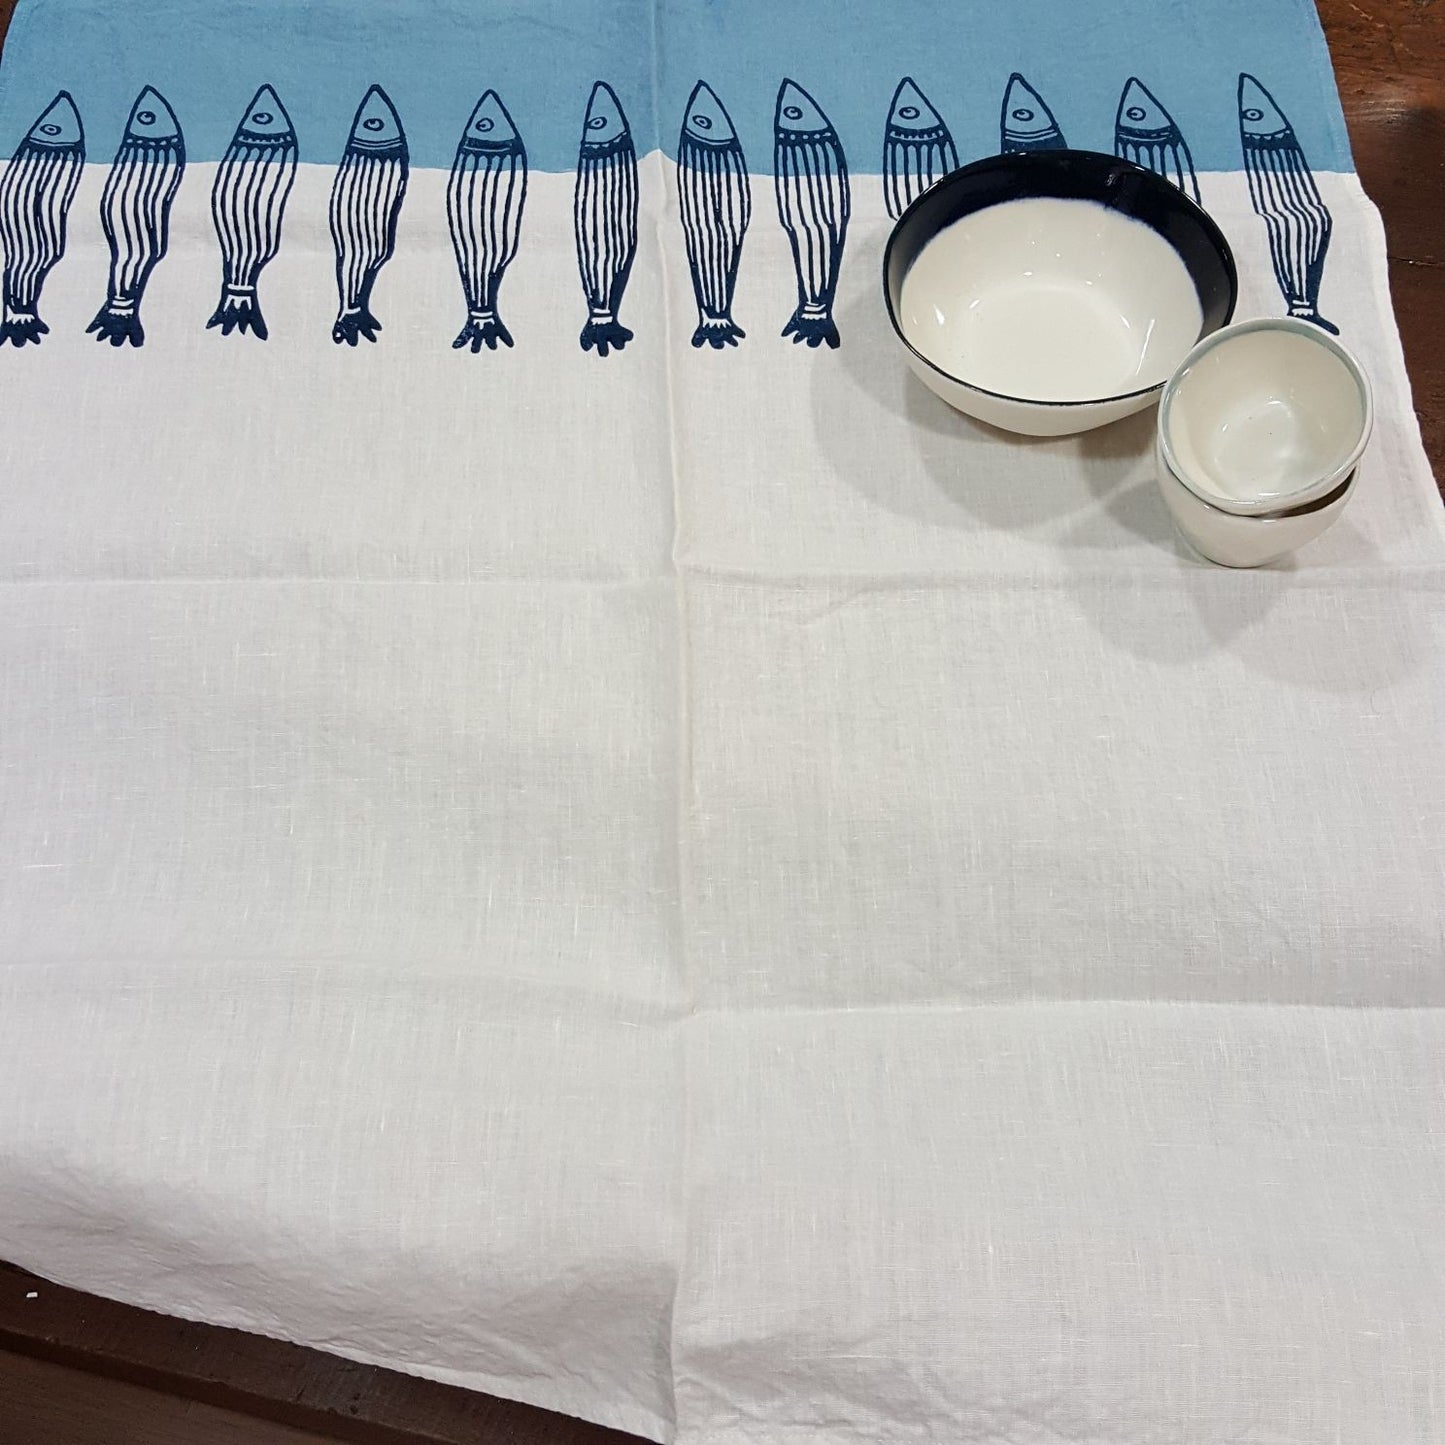 Panarea table runner with sardines